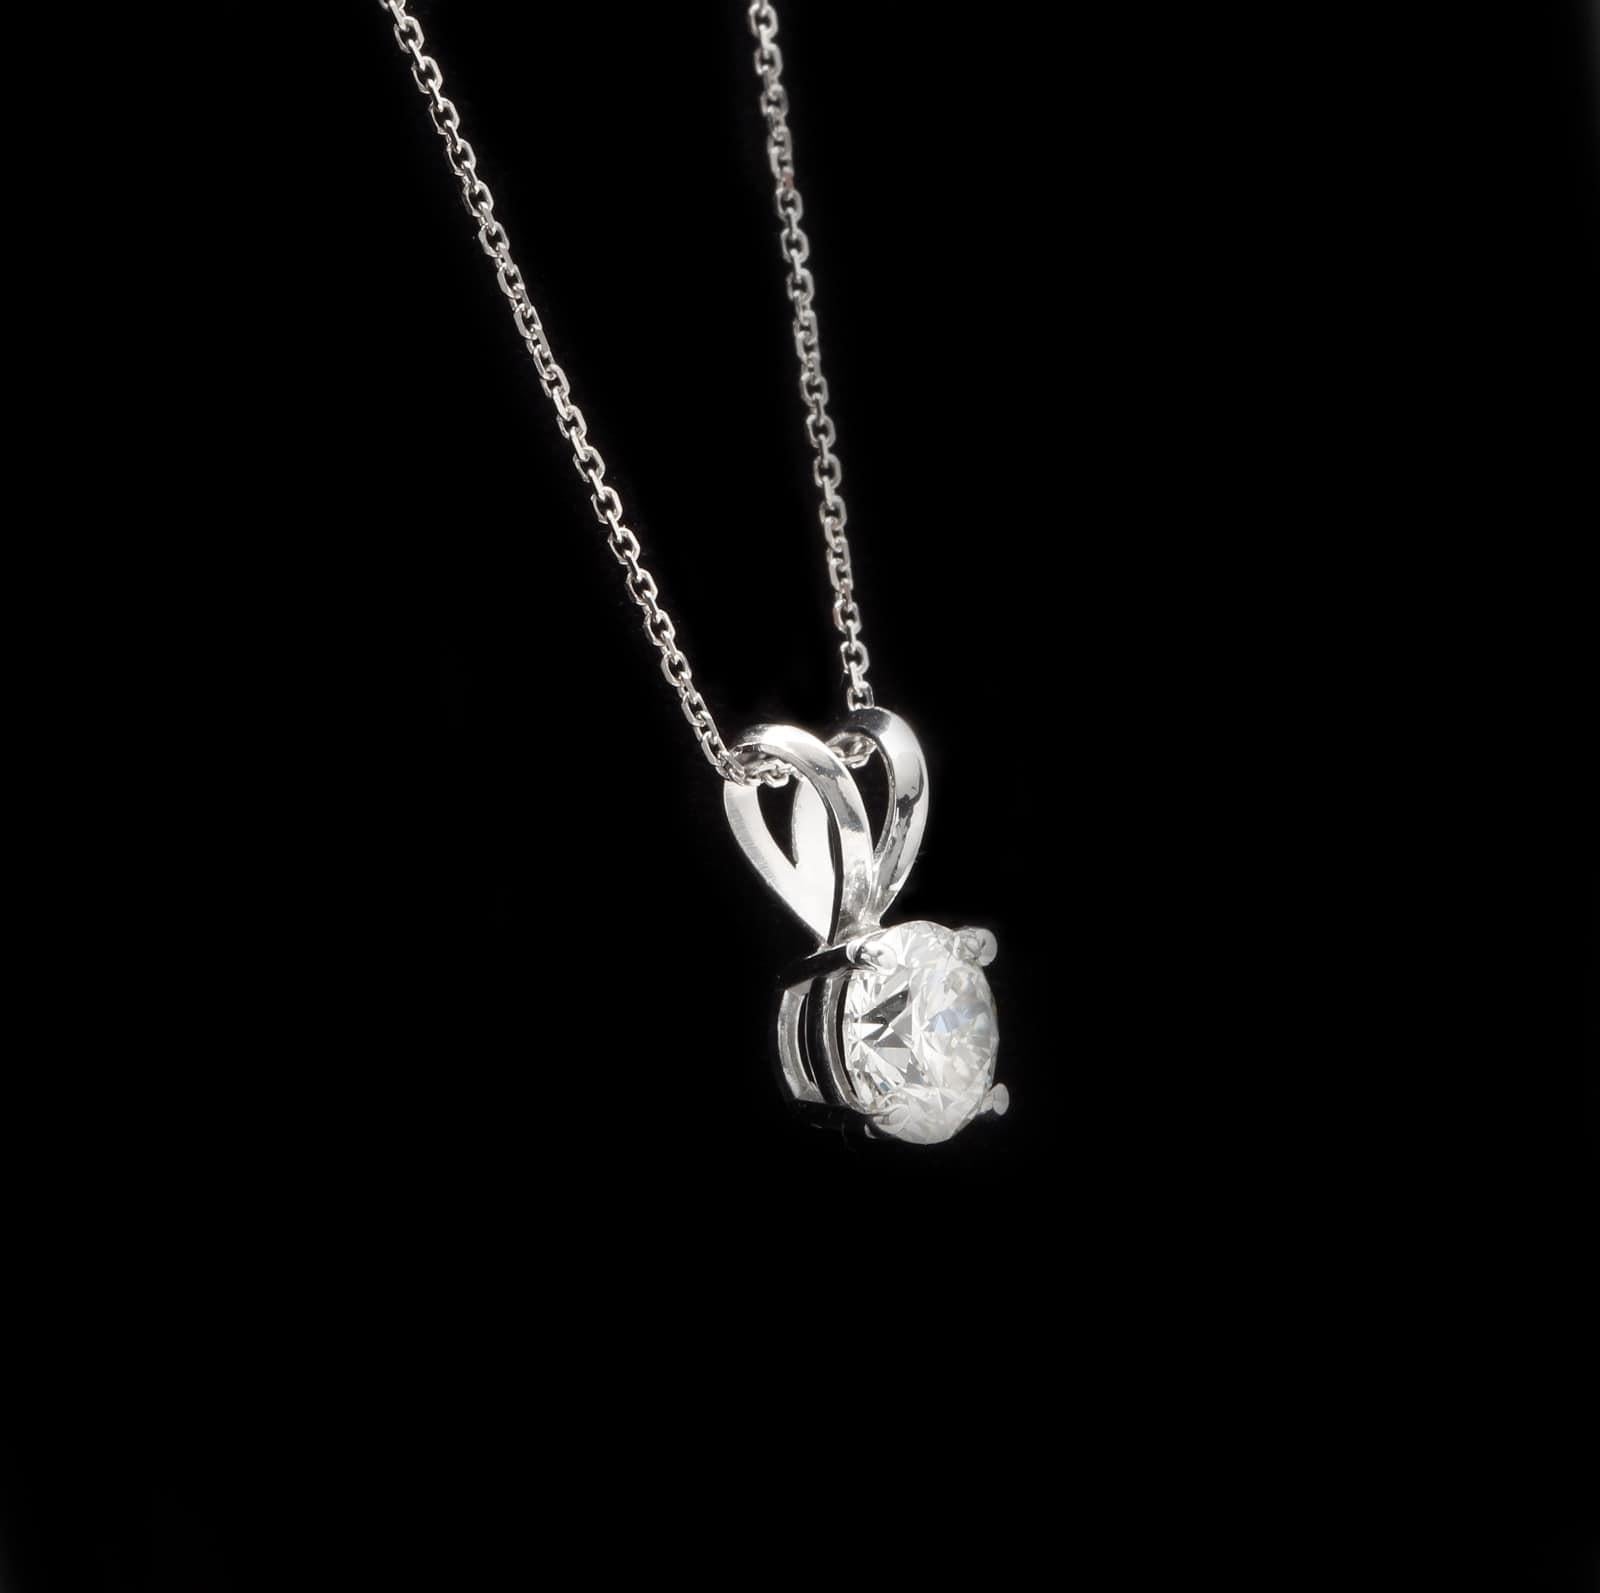 0.90Ct Natural Diamond 14K Solid White Gold Necklace Pendant

Amazing looking piece! 

Stamped: 14K

Suggested Replacement Value: 4,000.00 

Total Natural Round Diamond weights: 0.90 Carats (I / VS2)

Total Chain Length is 16 inches

Total item